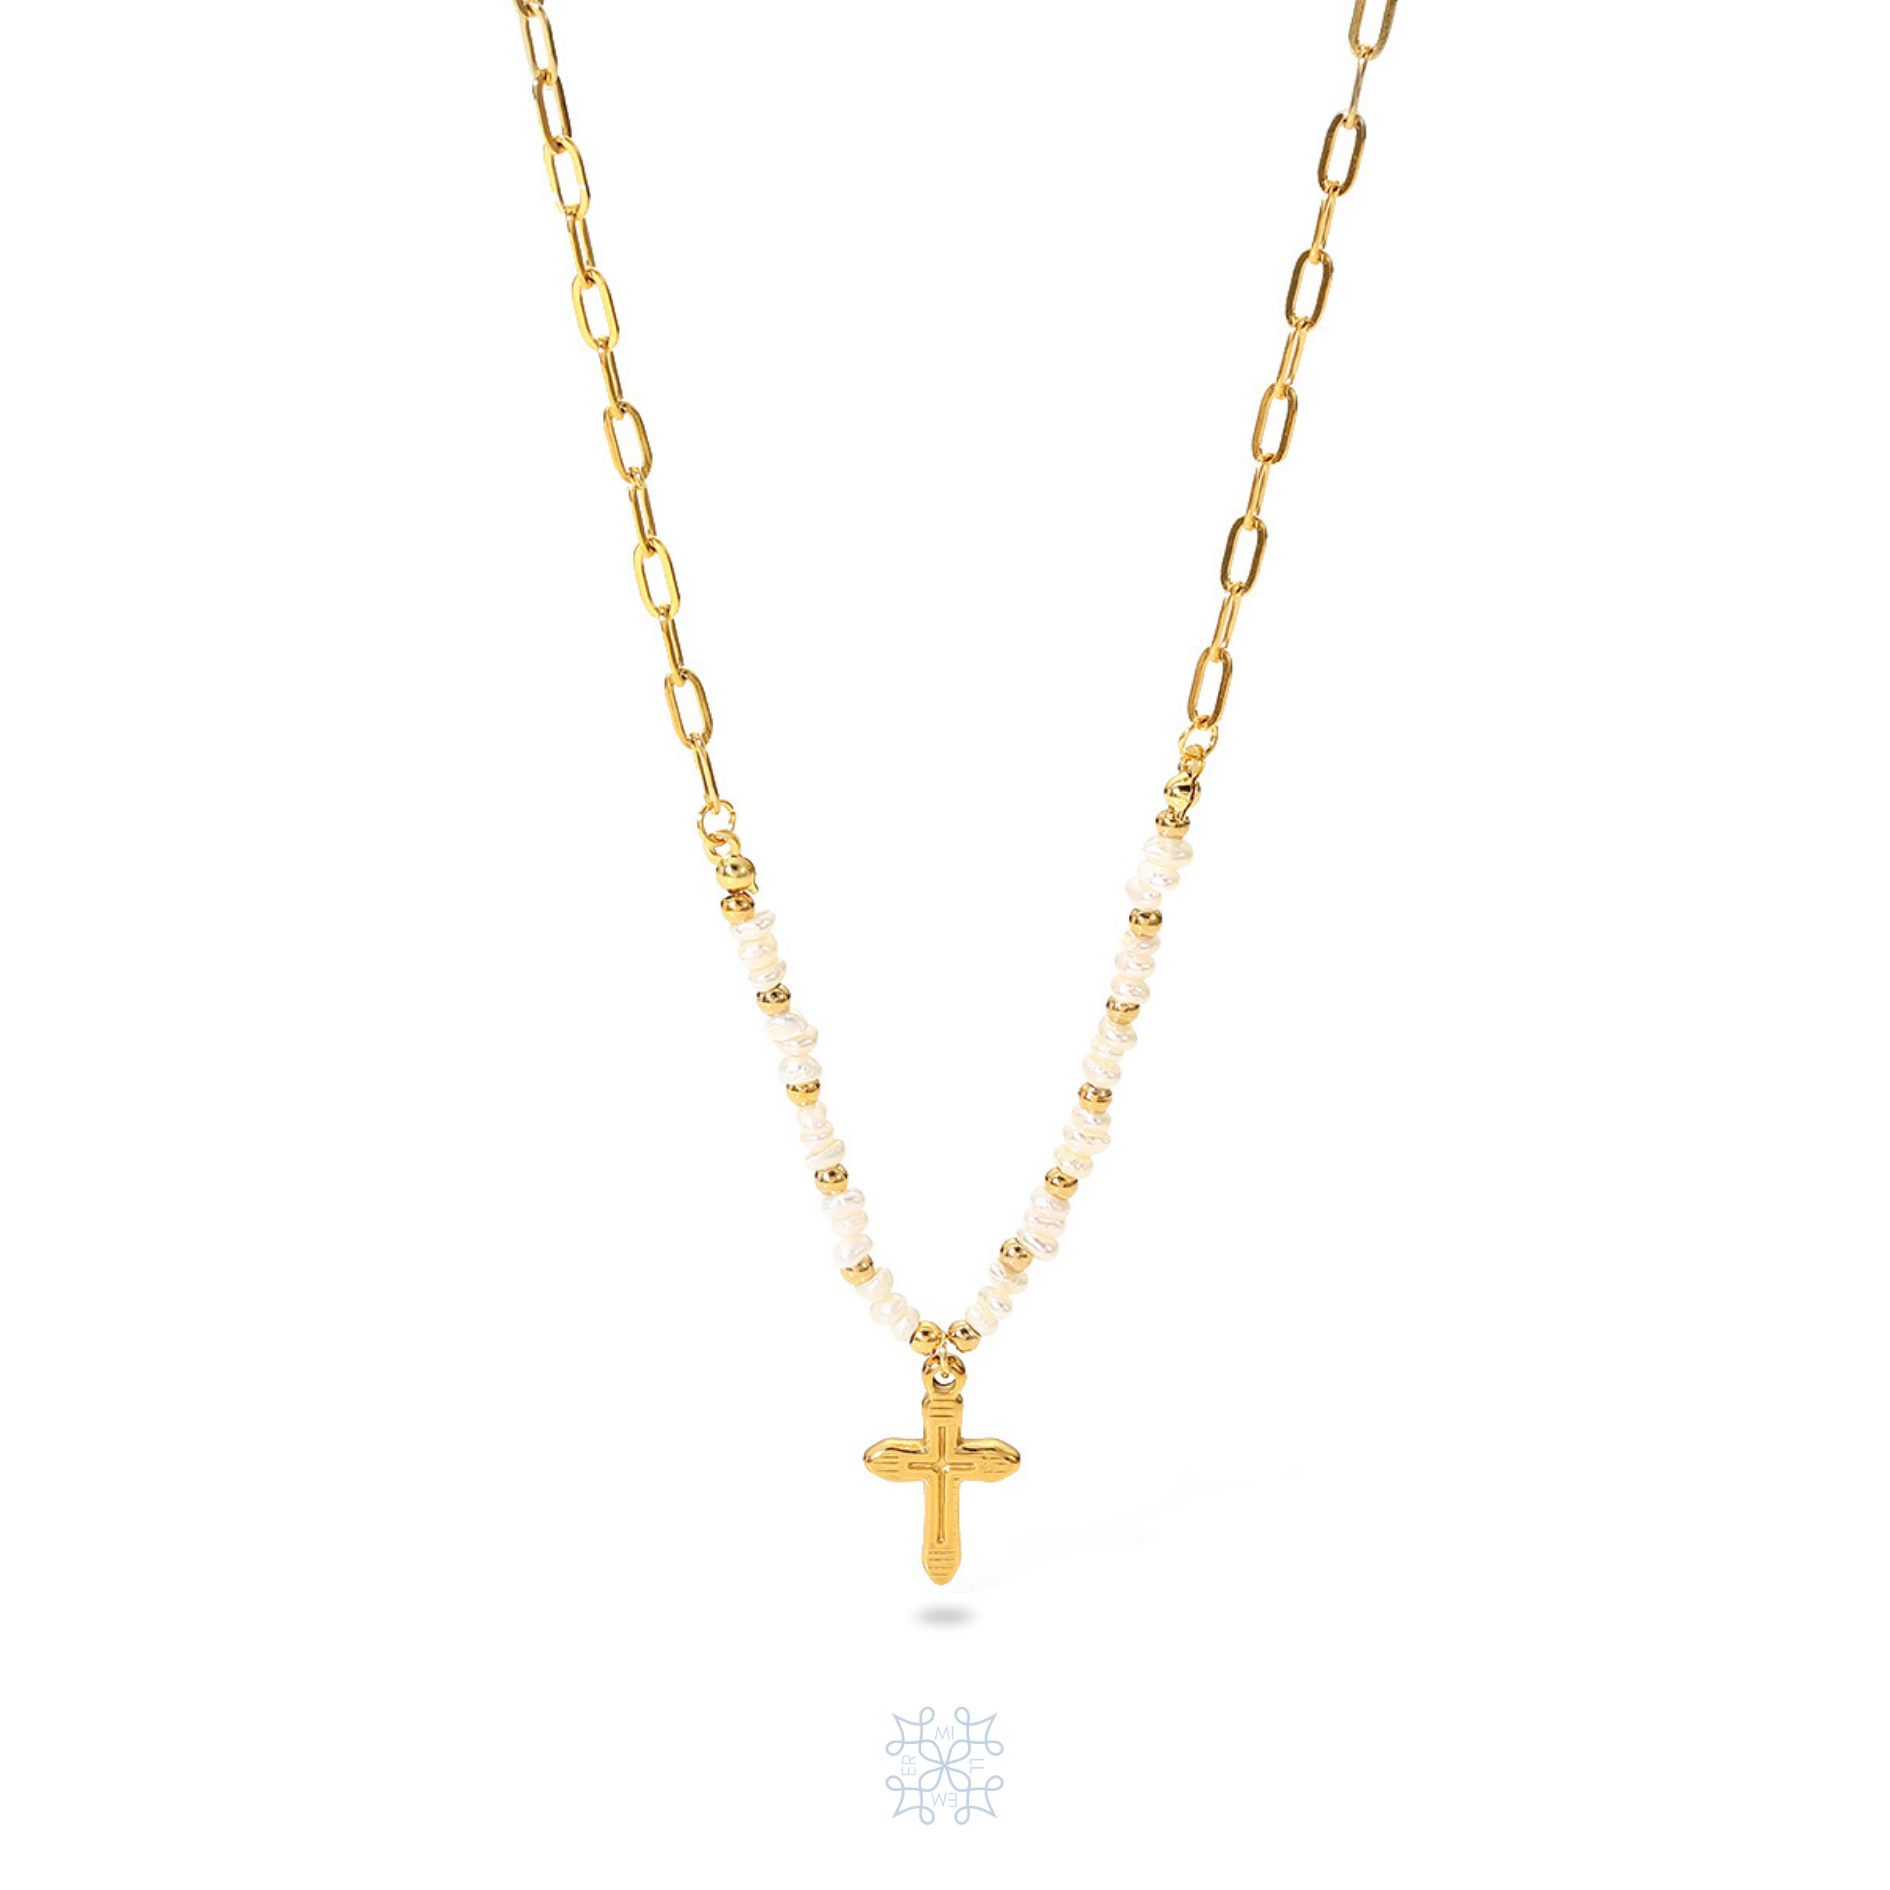 Gold necklace. Gold Cross in the moddle. White pearls on both sides of the cross. Gold Paperclip chain. Faith Pearls Gold Cross Necklace